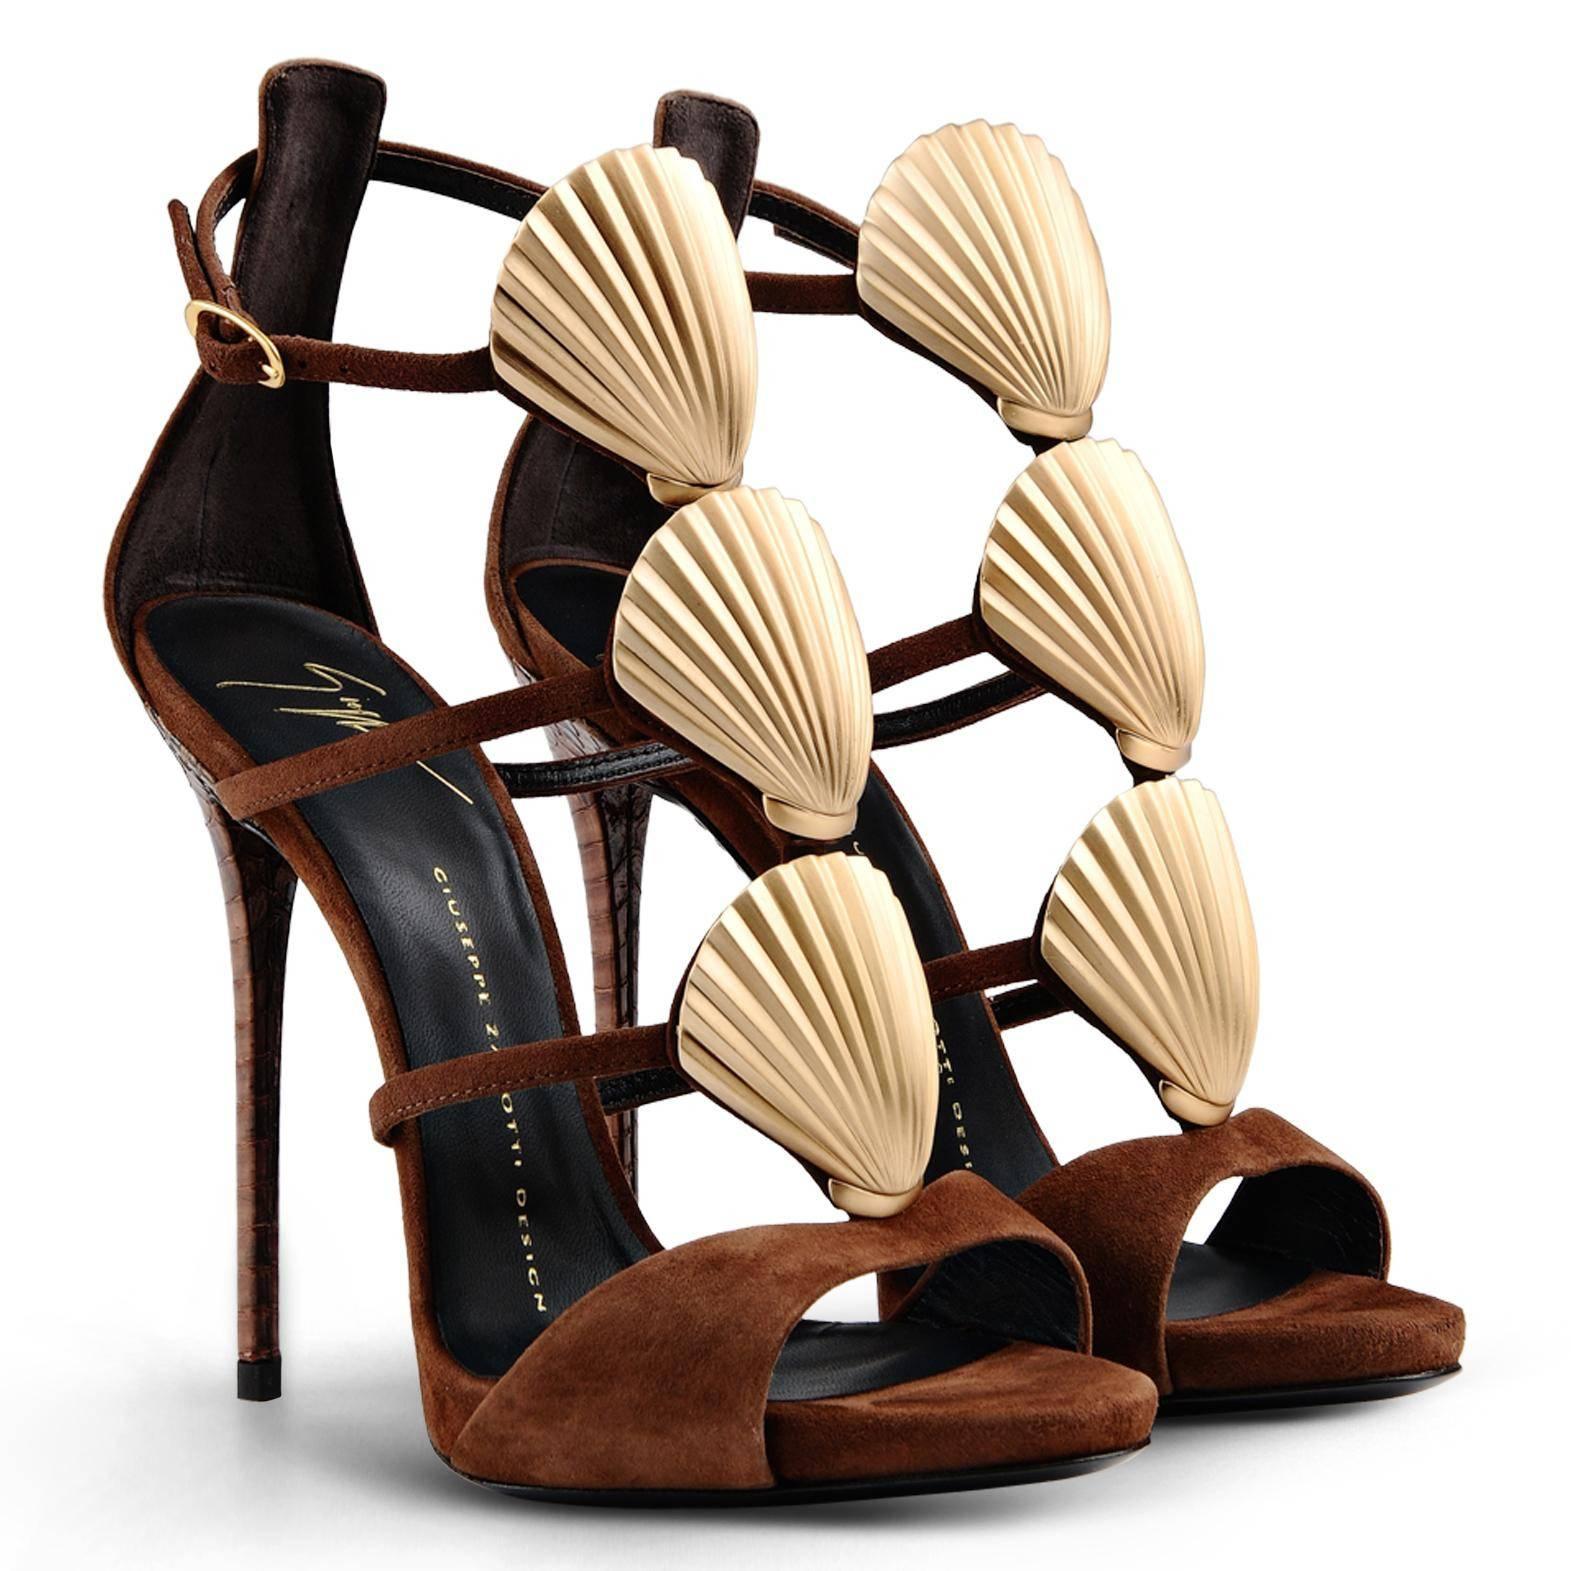 Giuseppe Zanotti New Brown Suede Gold Shell Evening Sandals Heels in Box

Size IT 36
Python embossed leather
Suede
Metal
Made in Italy
Zipper closure
Heel height 4.75